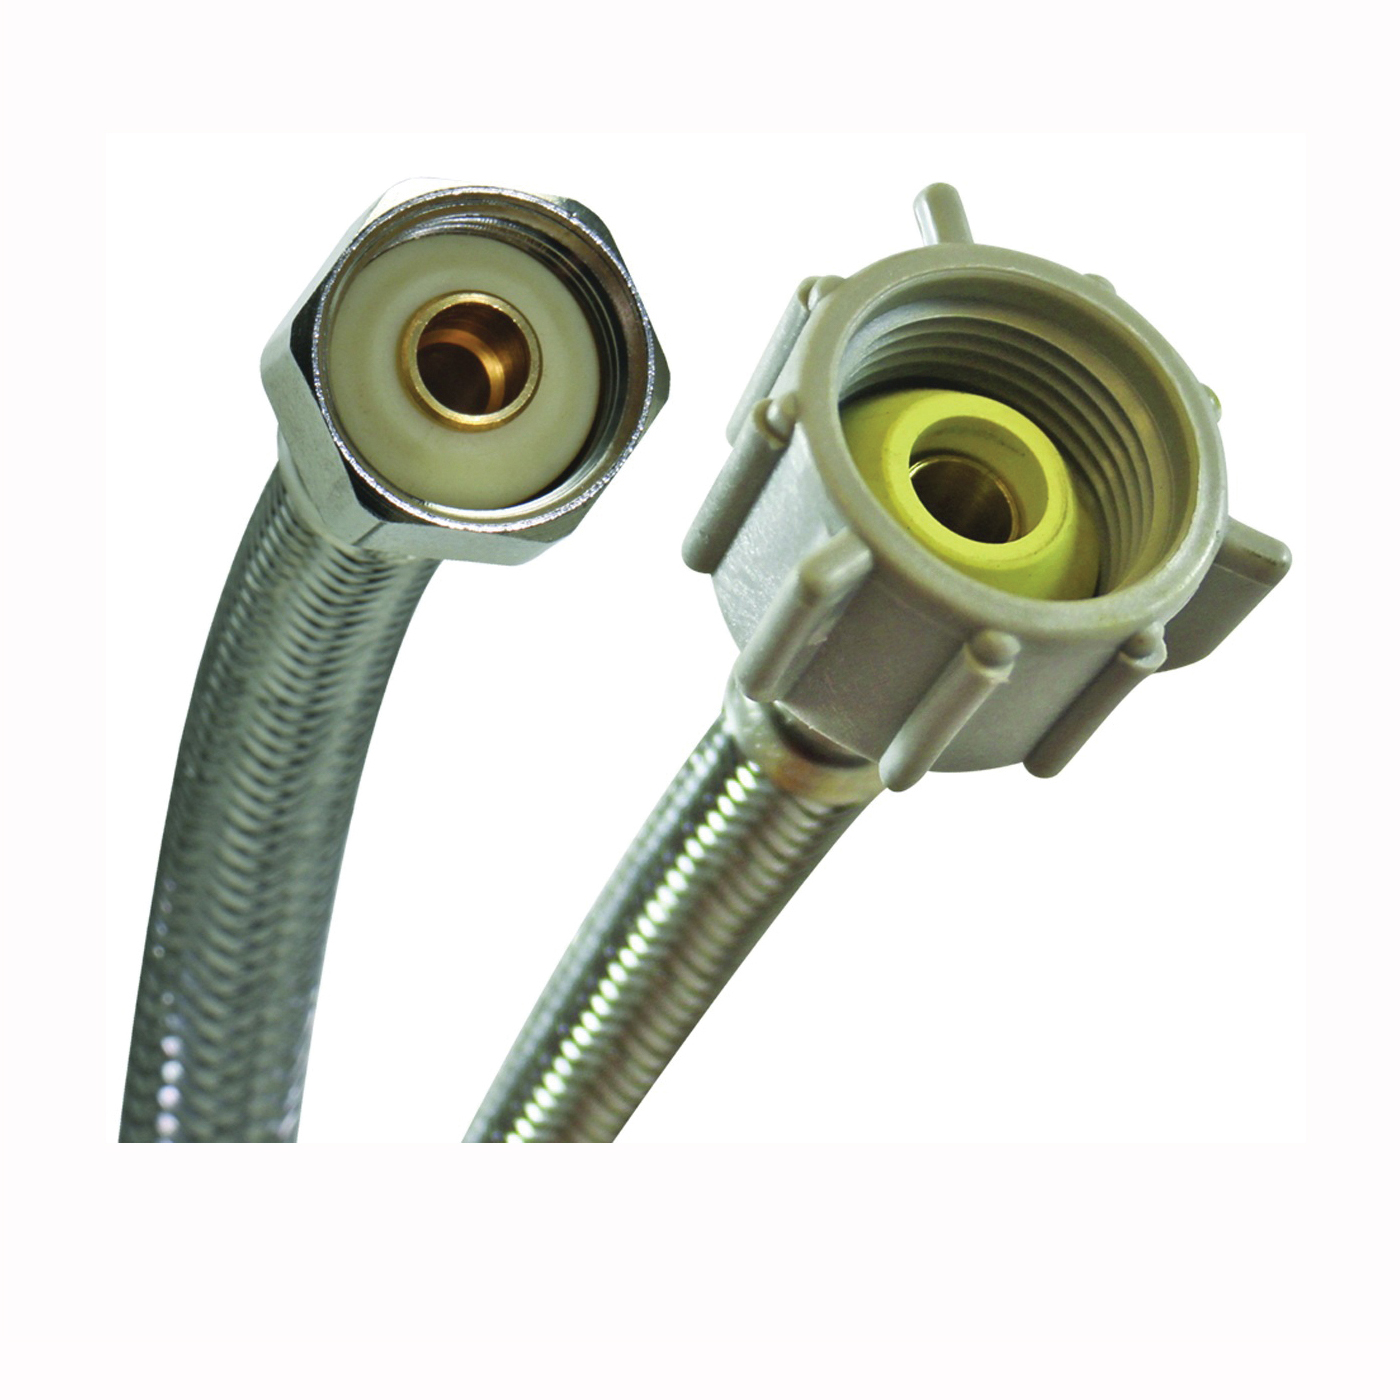 Fits-All B4T20U Toilet Connector, 3/8 in Inlet, Compression Inlet, 7/8 in Outlet, Ballcock Outlet, Stainless Steel, 20 in L